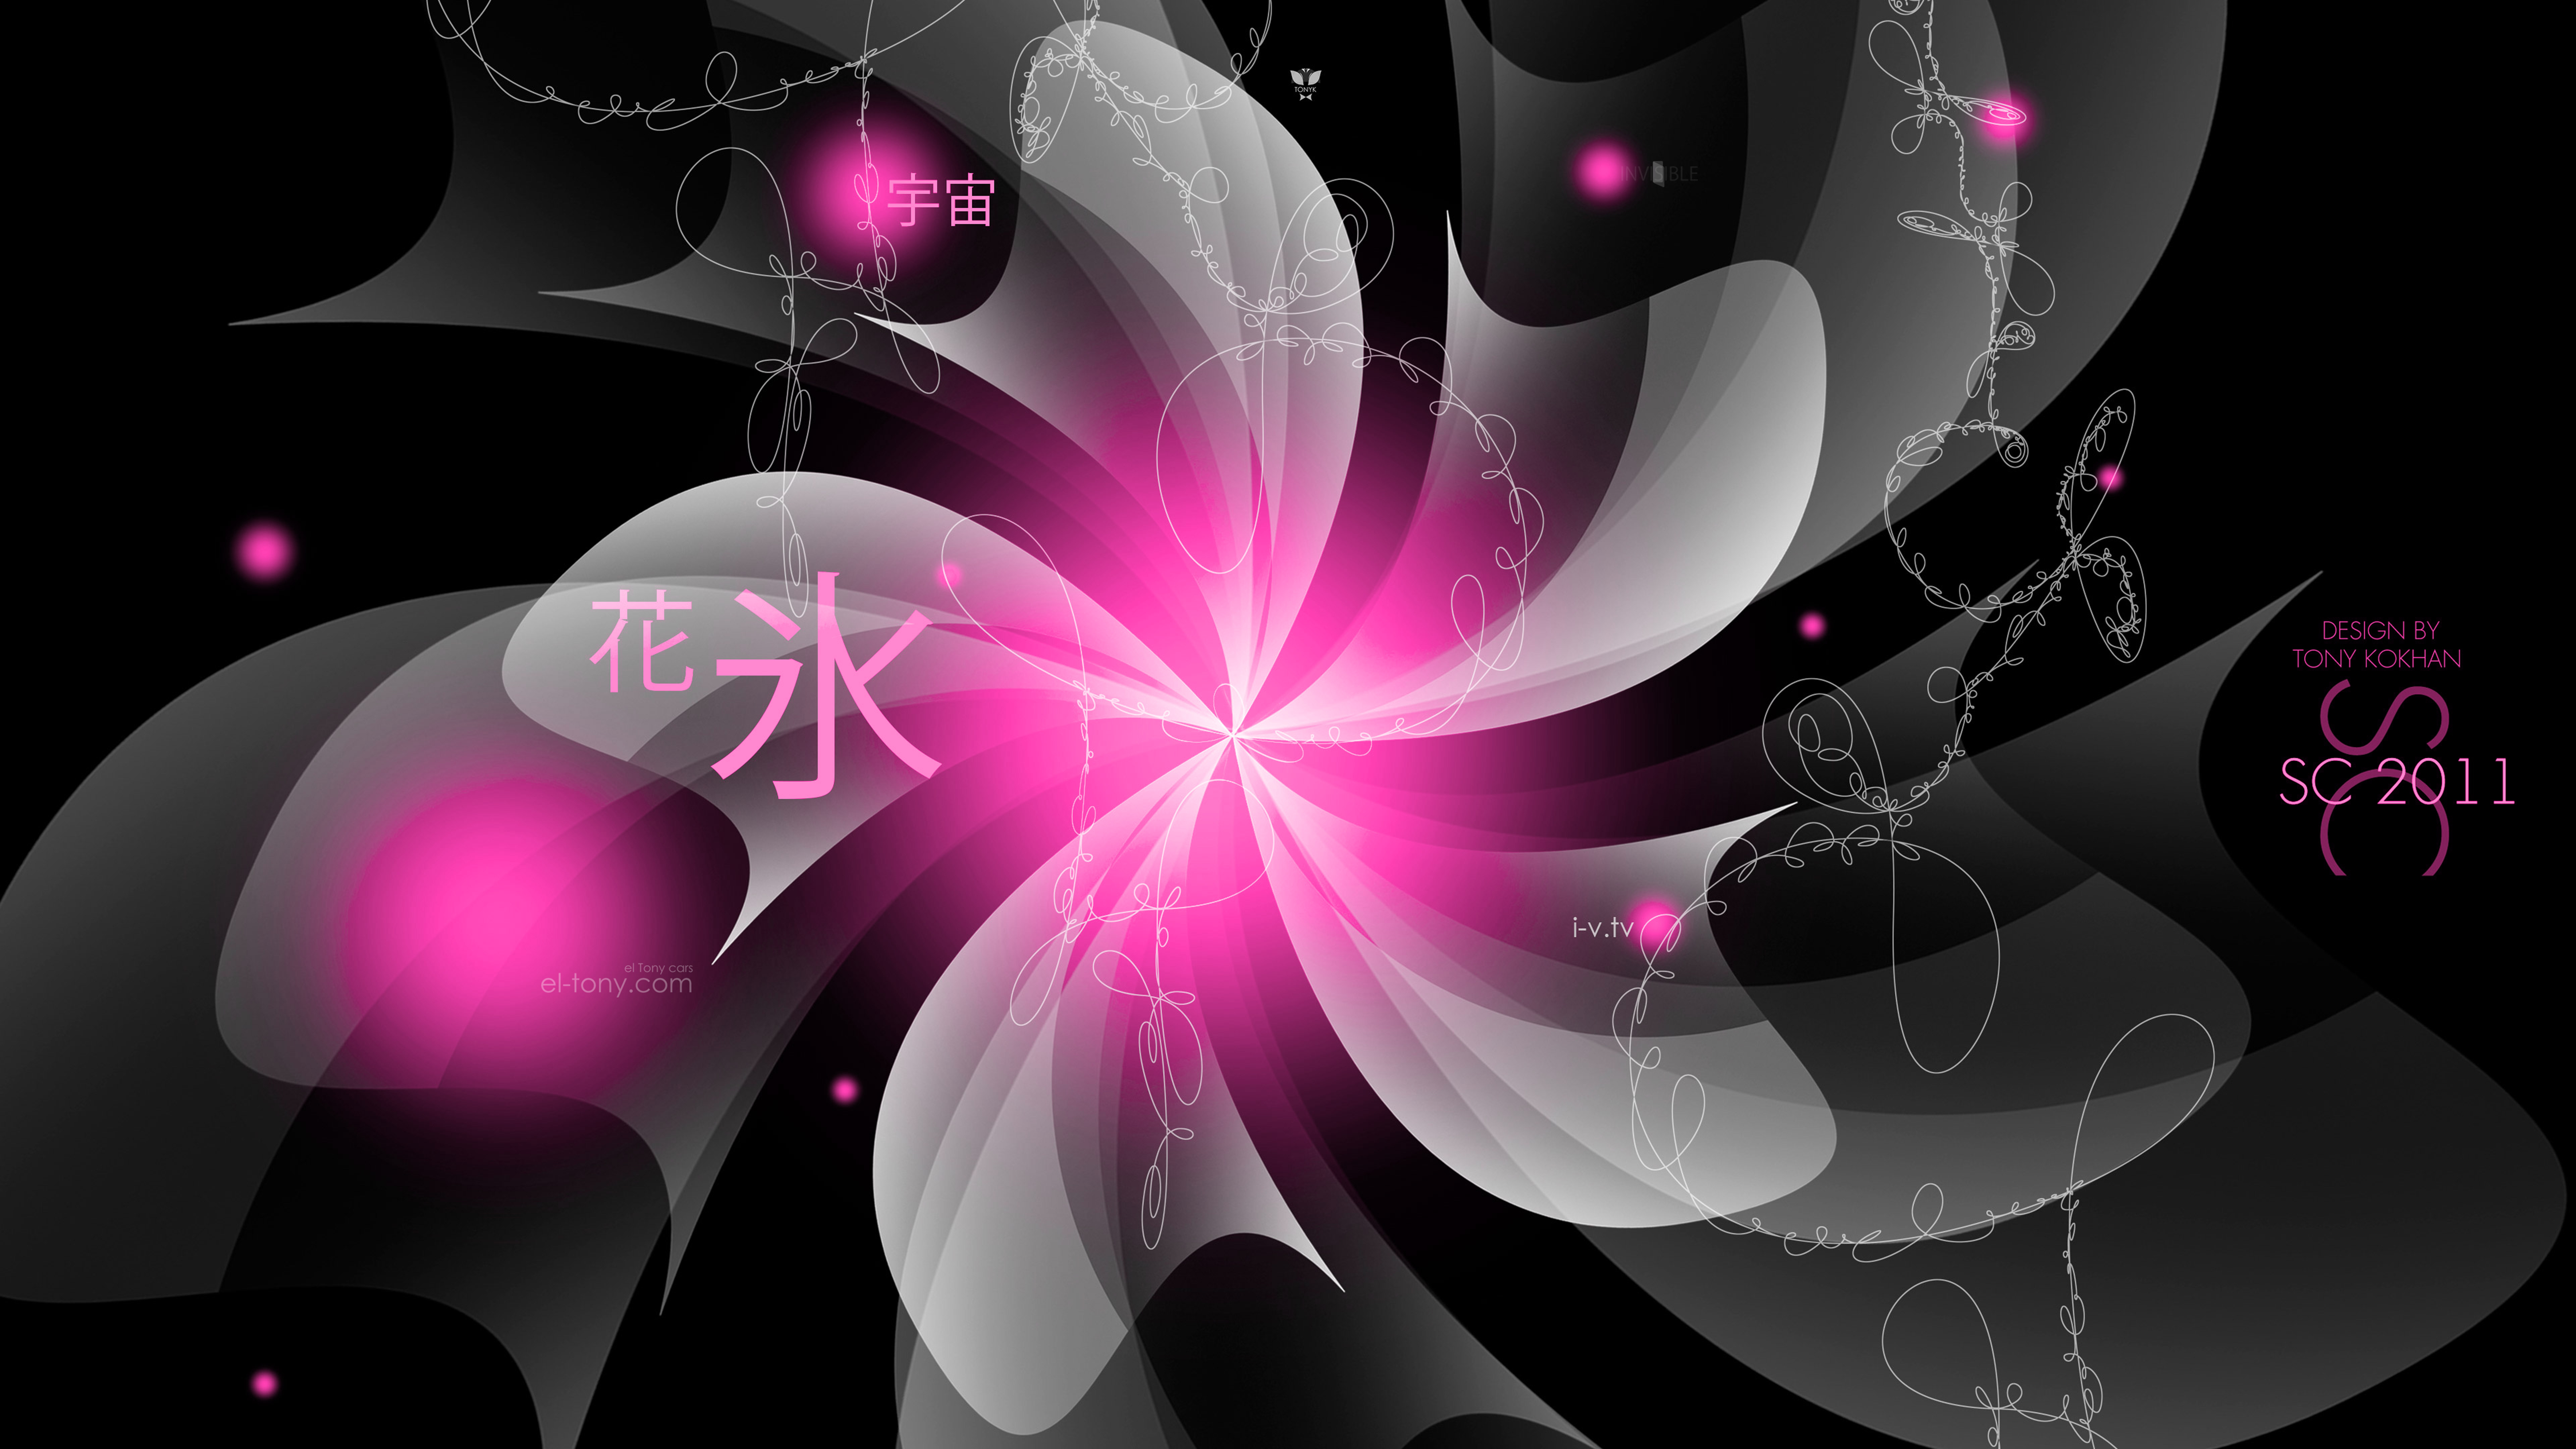 Universe-Ice-Flower-Super-Abstract-Simple-Creative-Japanese-Hieroglyph-Neural-Network-Space-Thread-Neon-Art